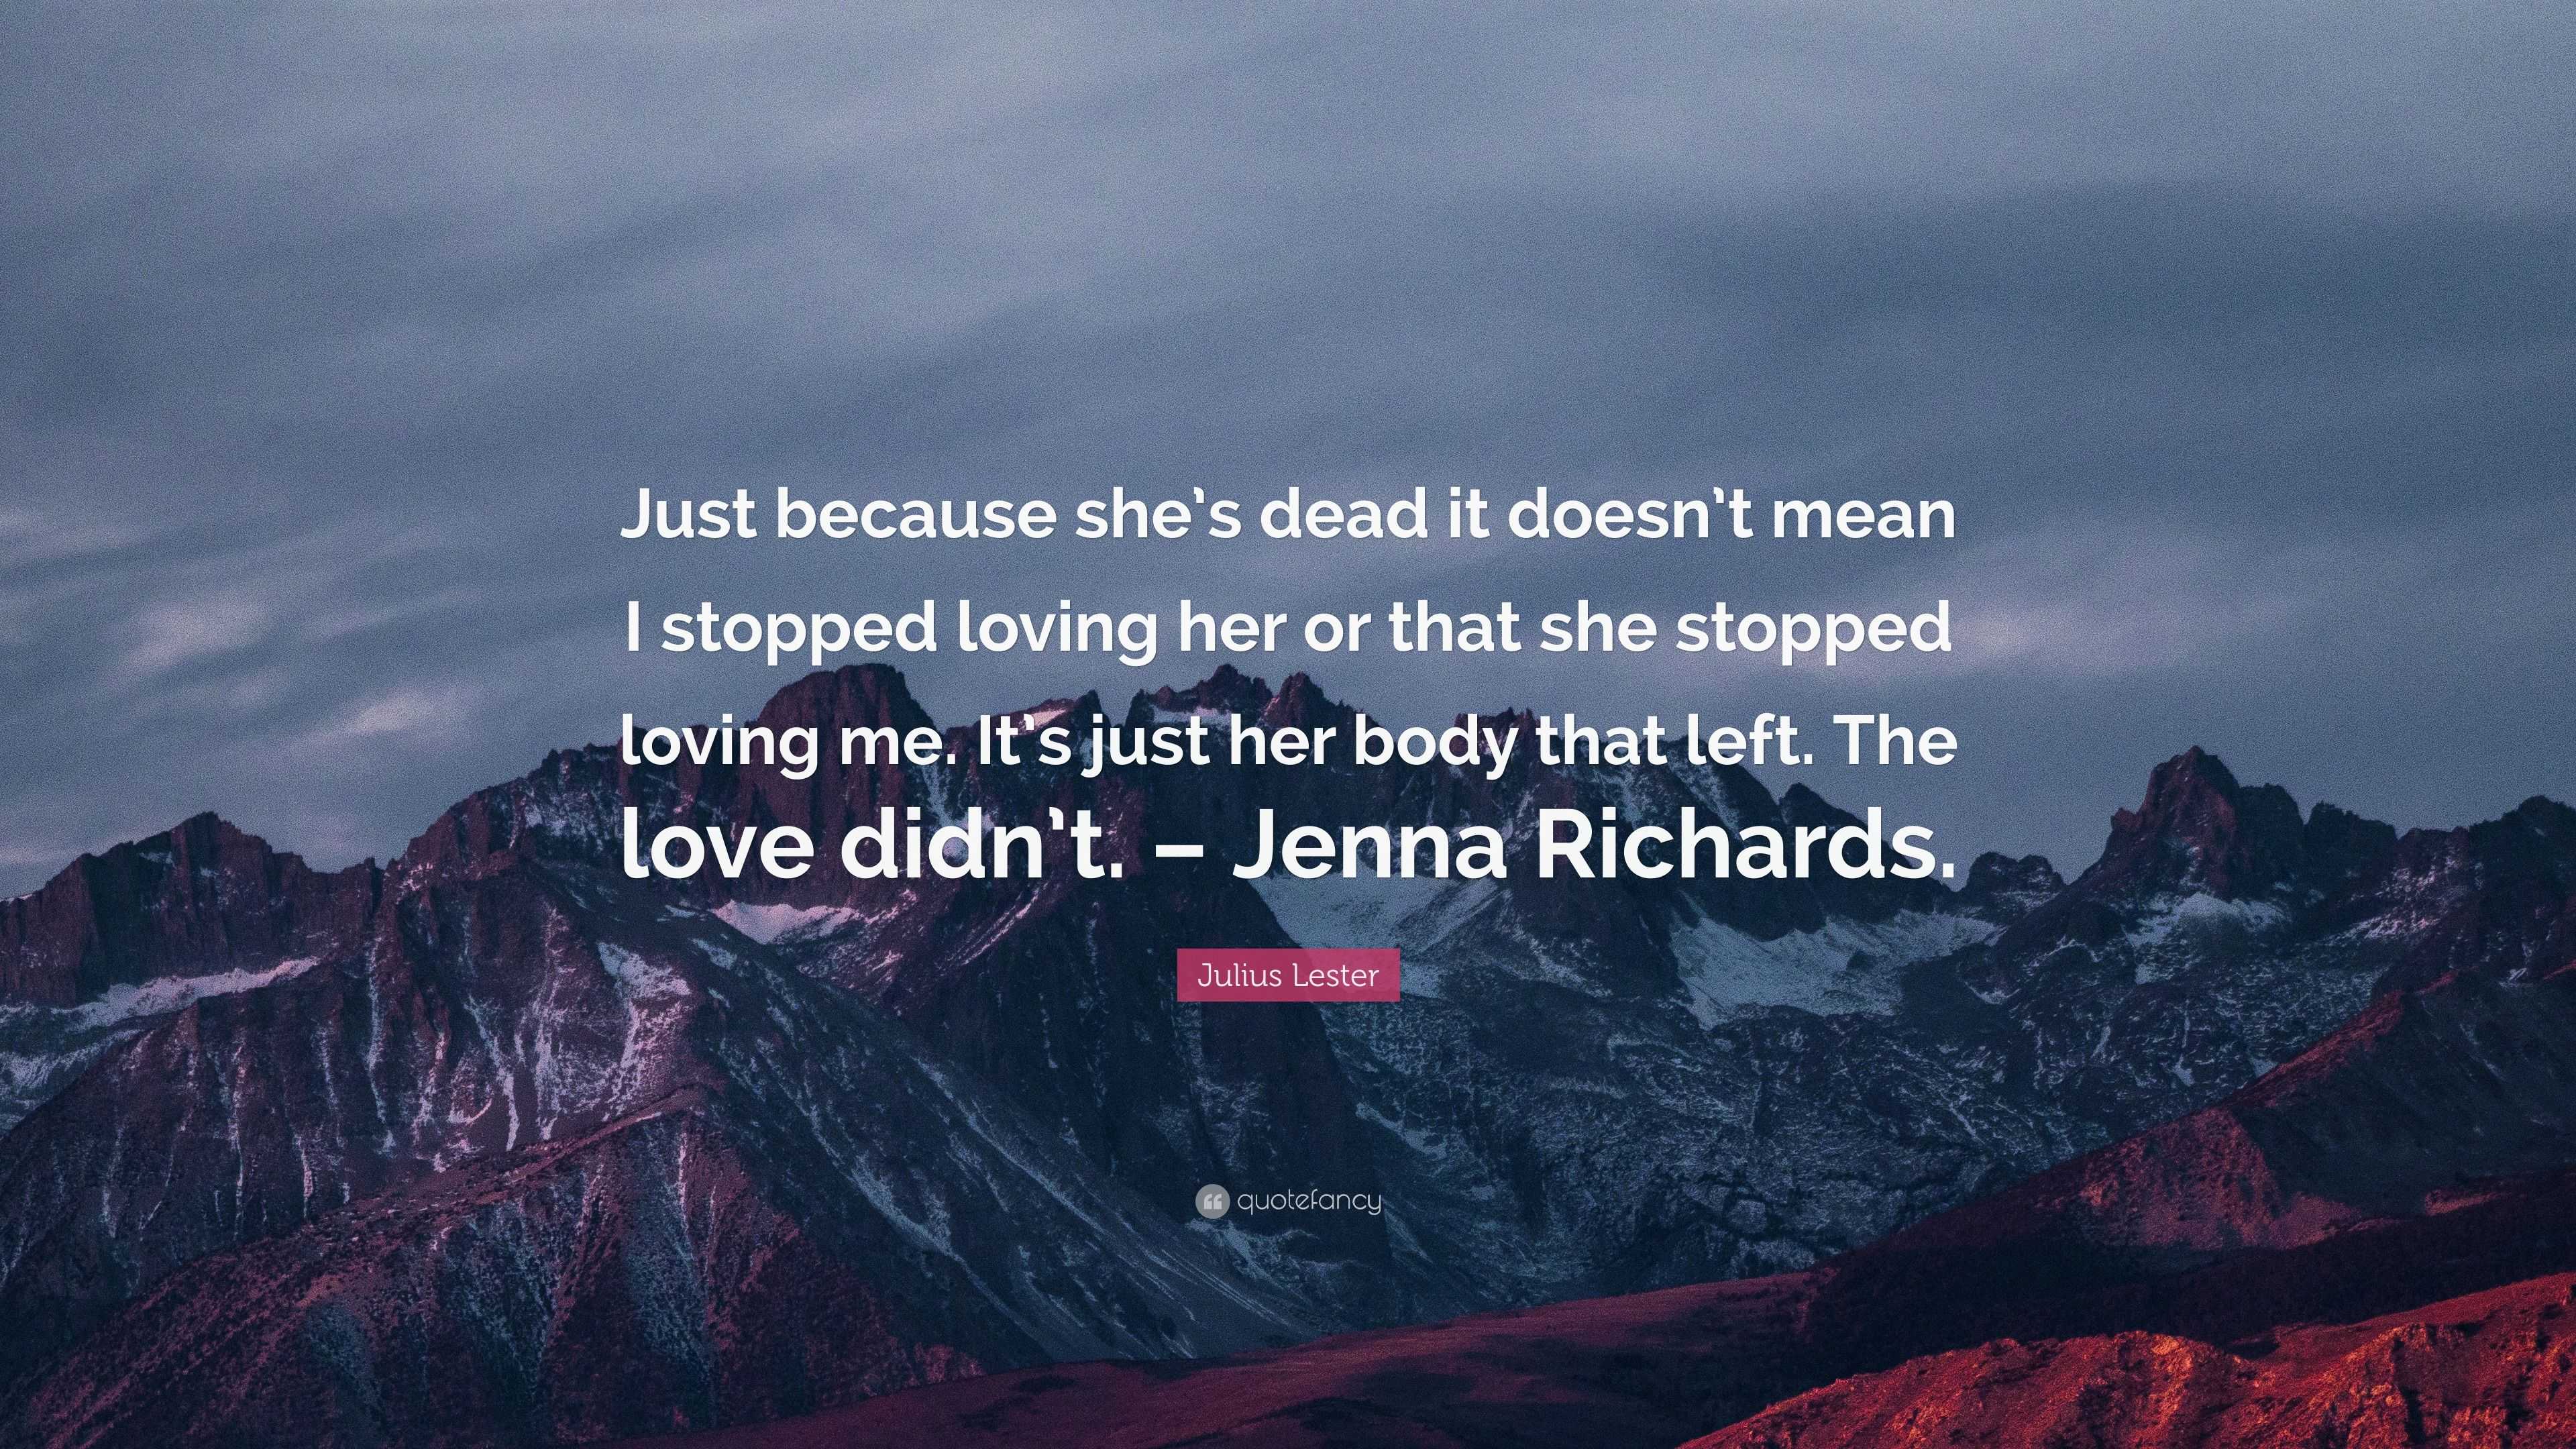 Julius Lester Quote: “Just because she’s dead it doesn’t mean I stopped ...